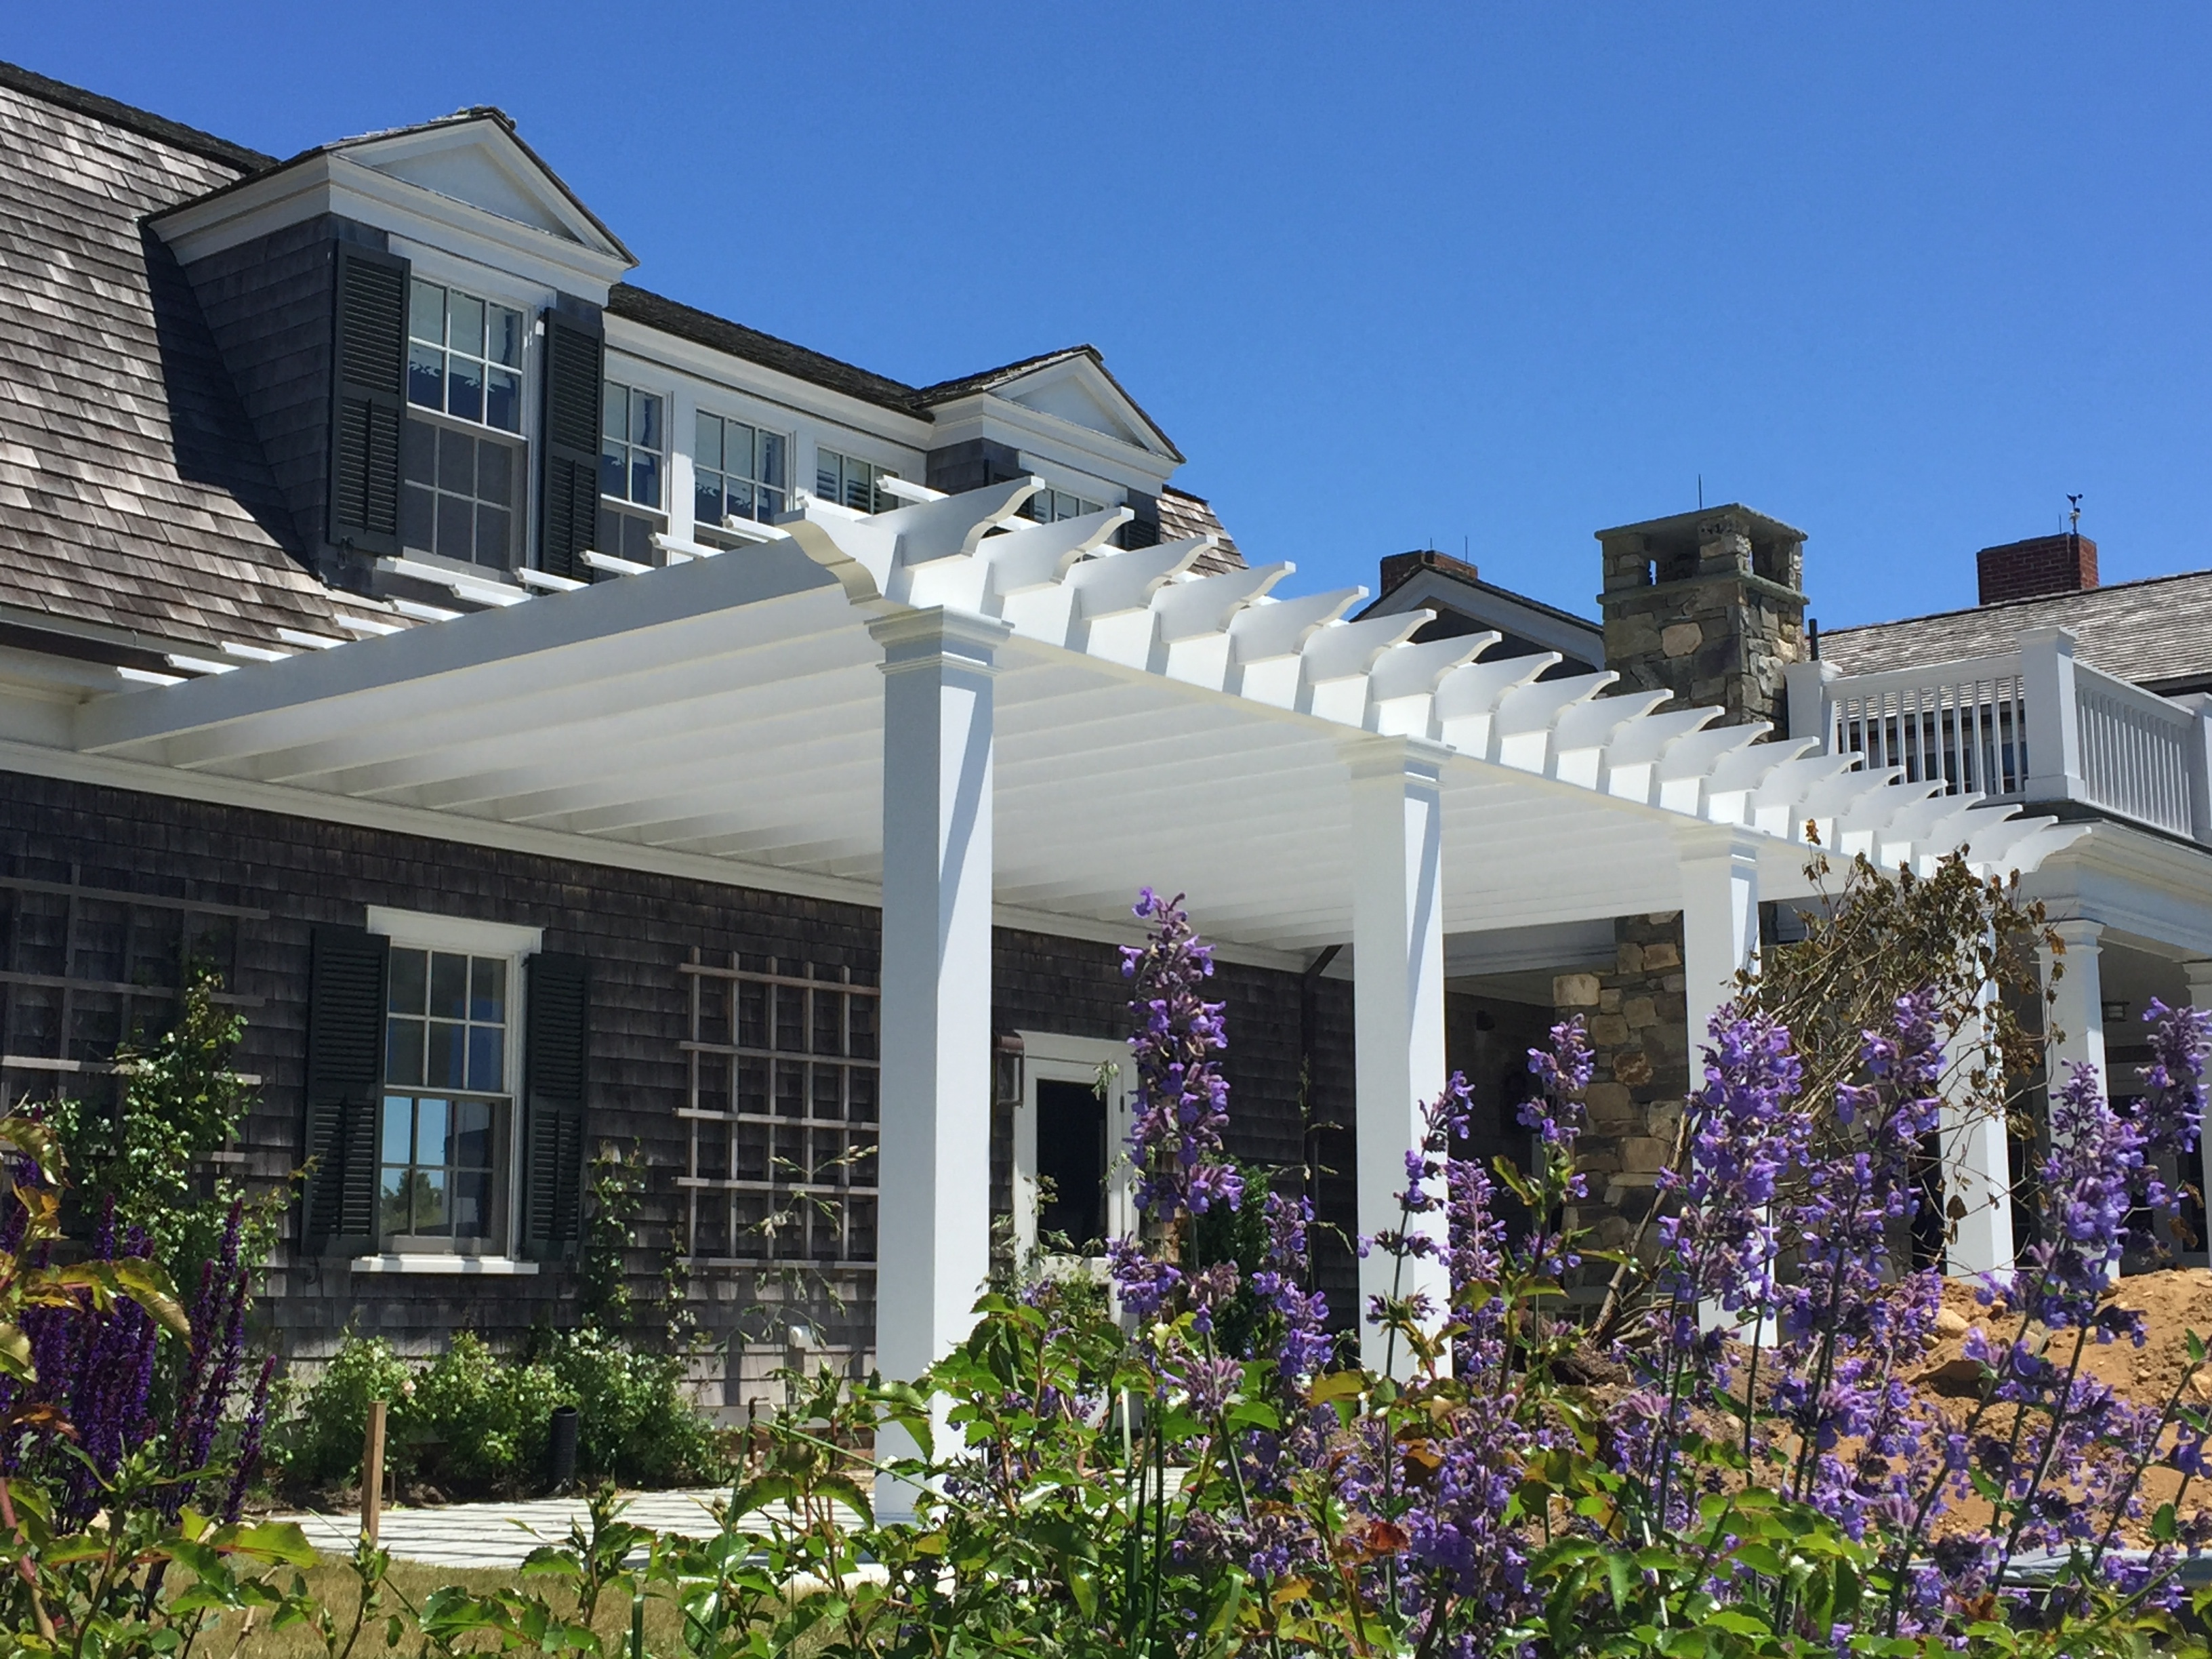 Pergola by Perfection Fence